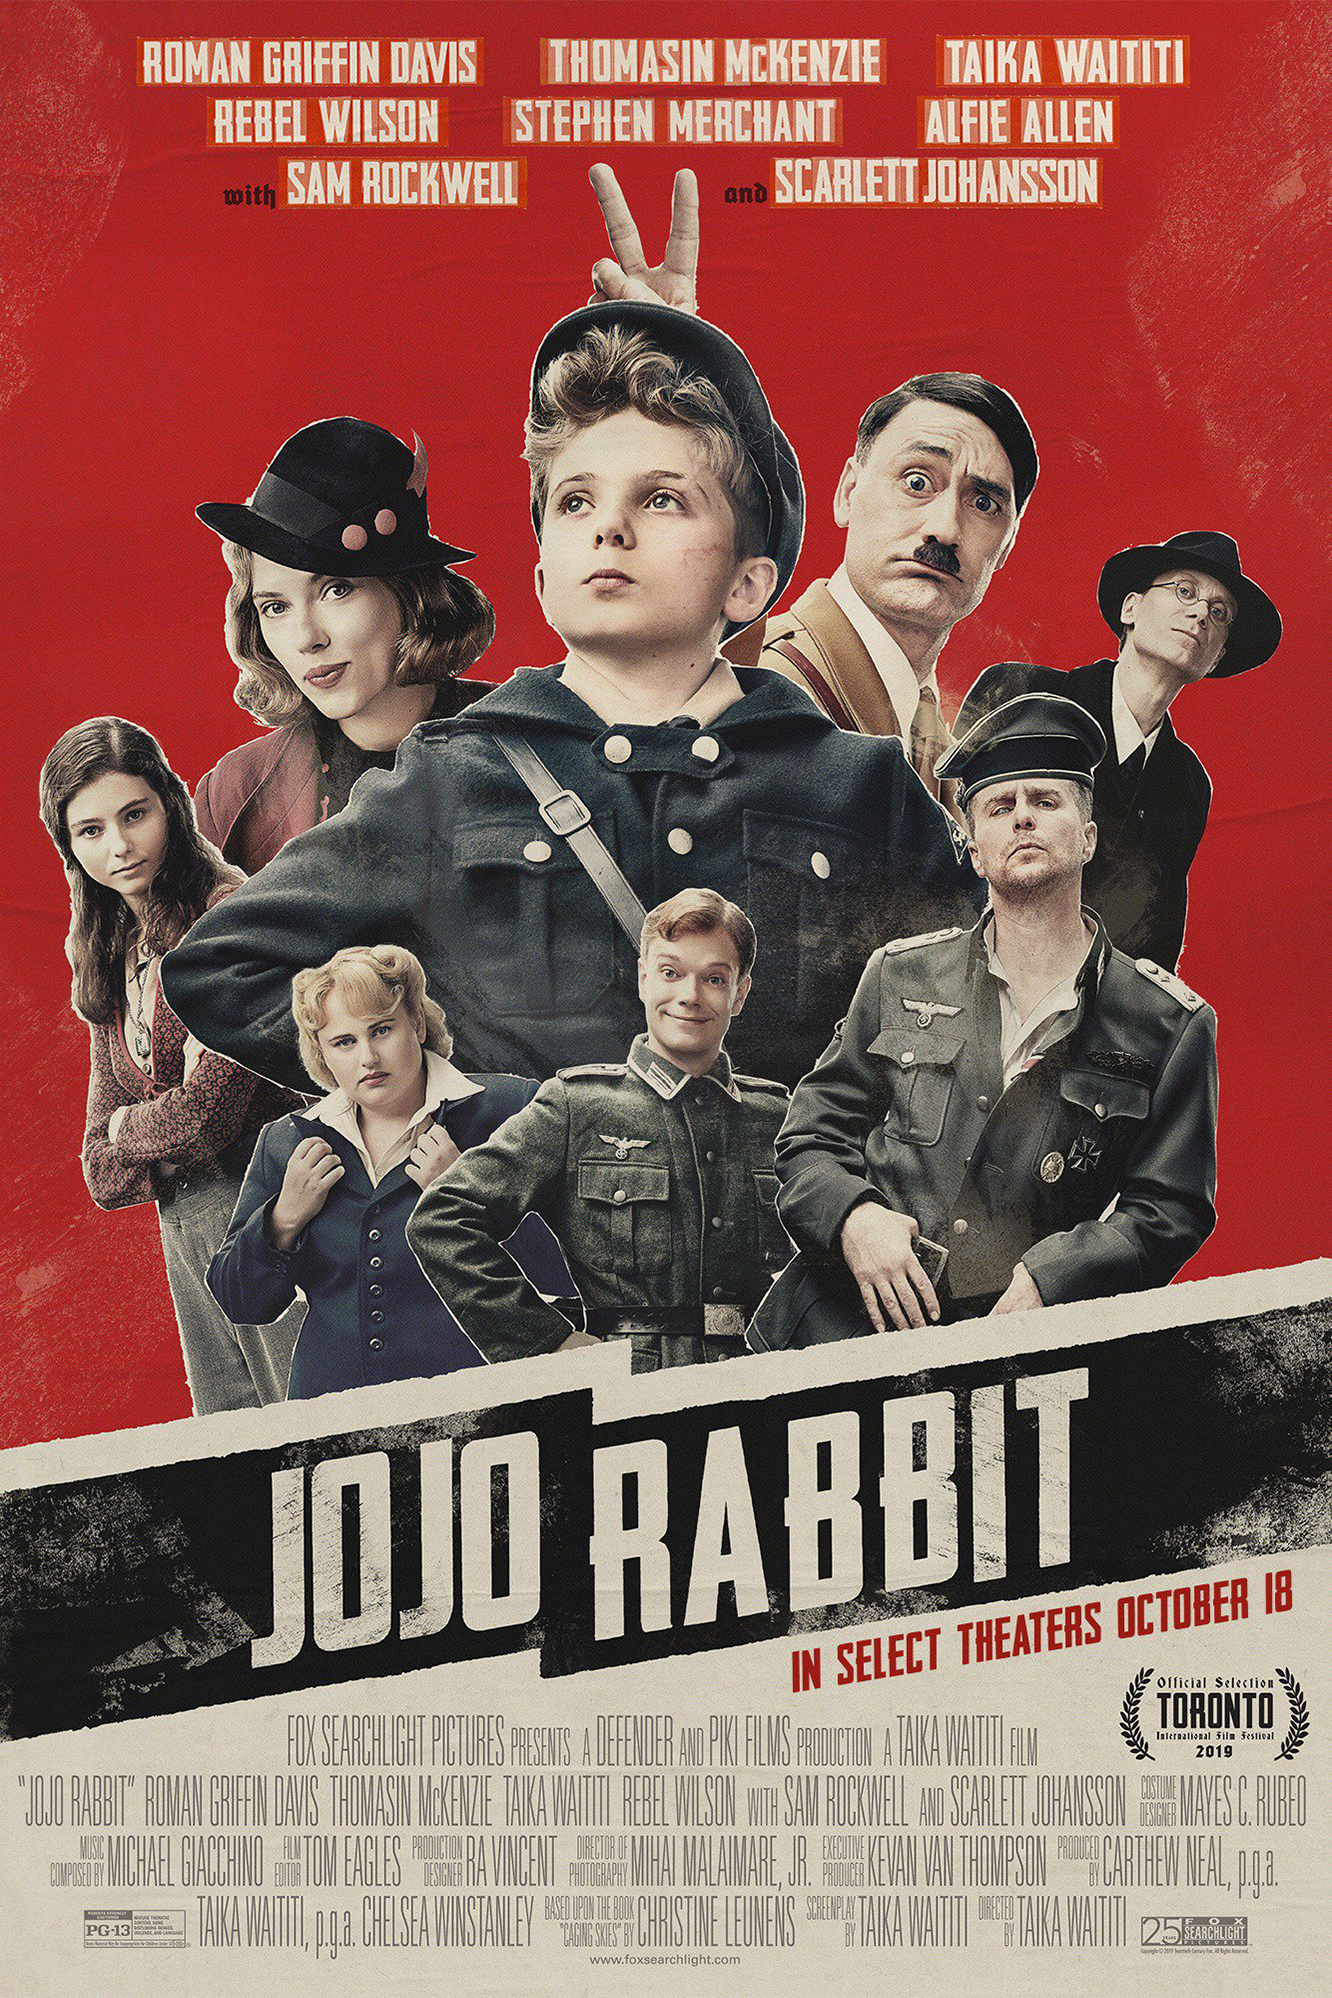 Jojo Rabbit Review: Roman Griffin Davis is the cherry on top of Taika Waititi's delectable dish